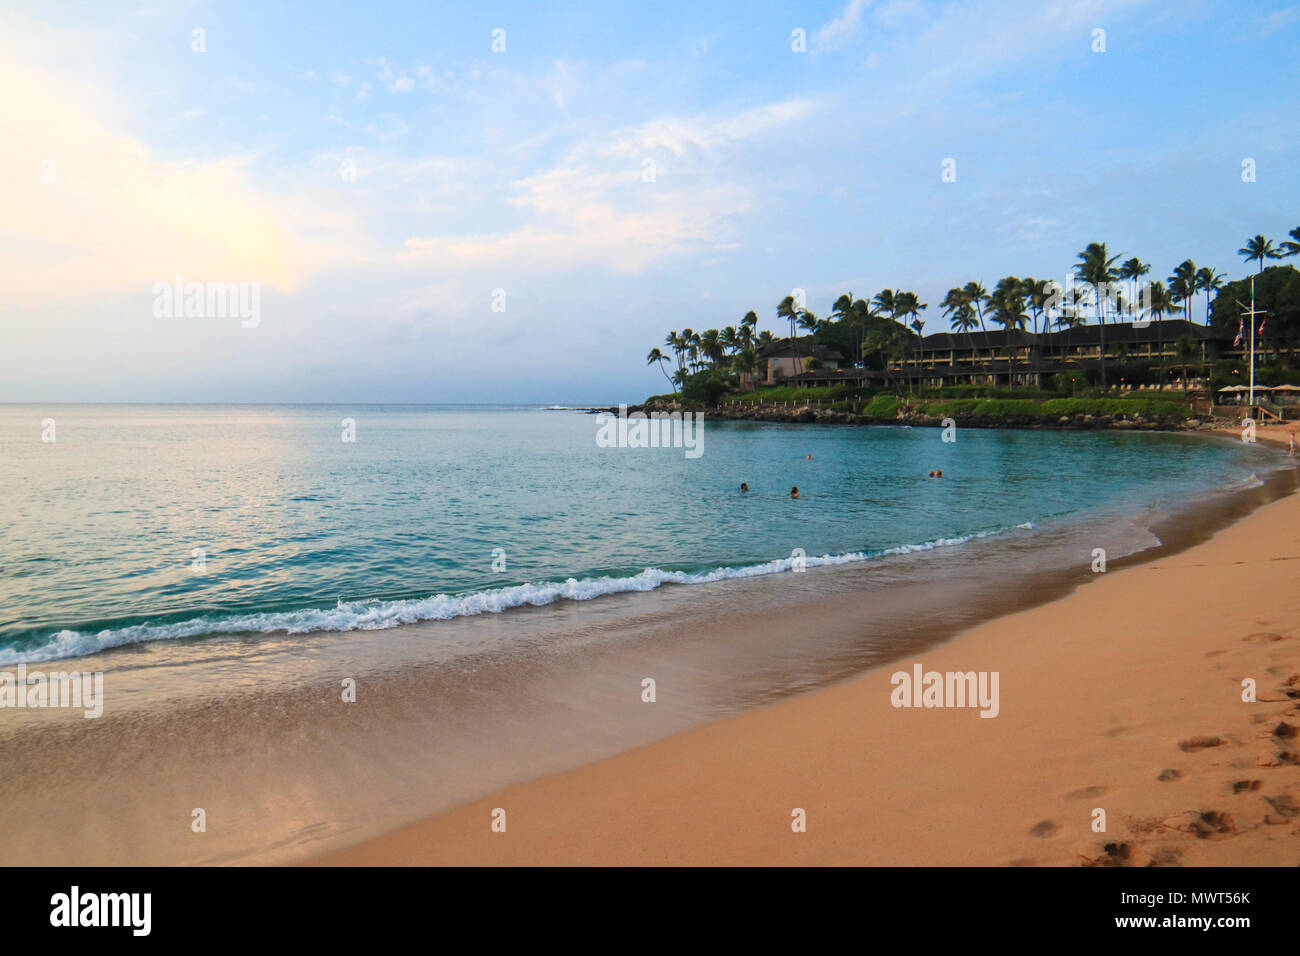 Frequently Rated As One Of The Most Beautiful Beaches In The World Kaanapali Beach In Lahaina Maui Hawaii Stock Photo Alamy,Fall Blooming Perennials Fall Perennial Flowers